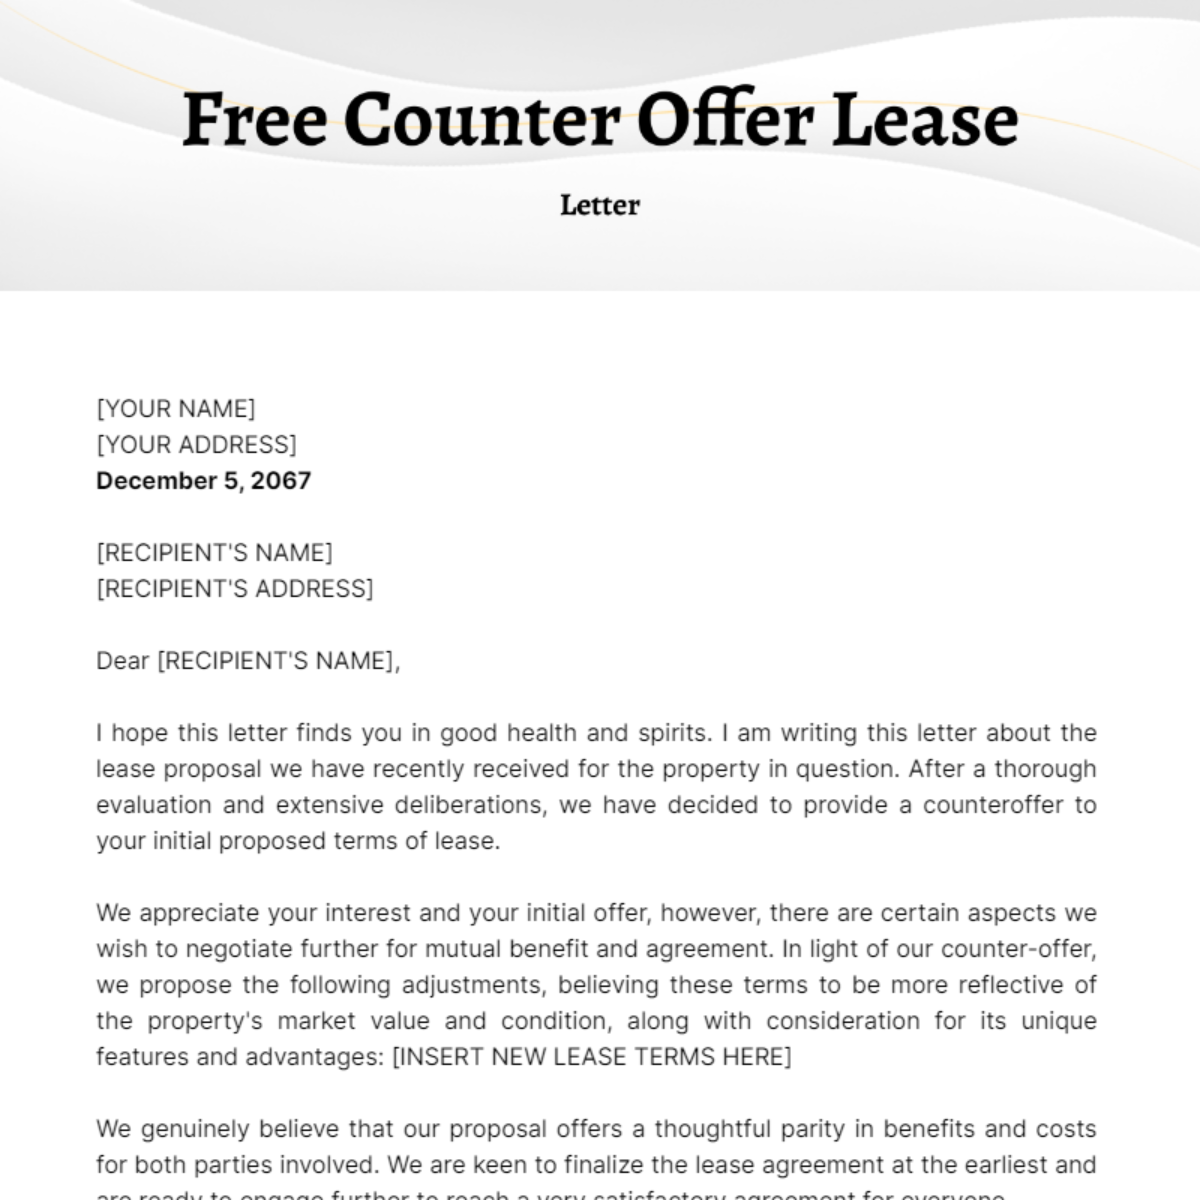 Counter Offer Lease Letter Template